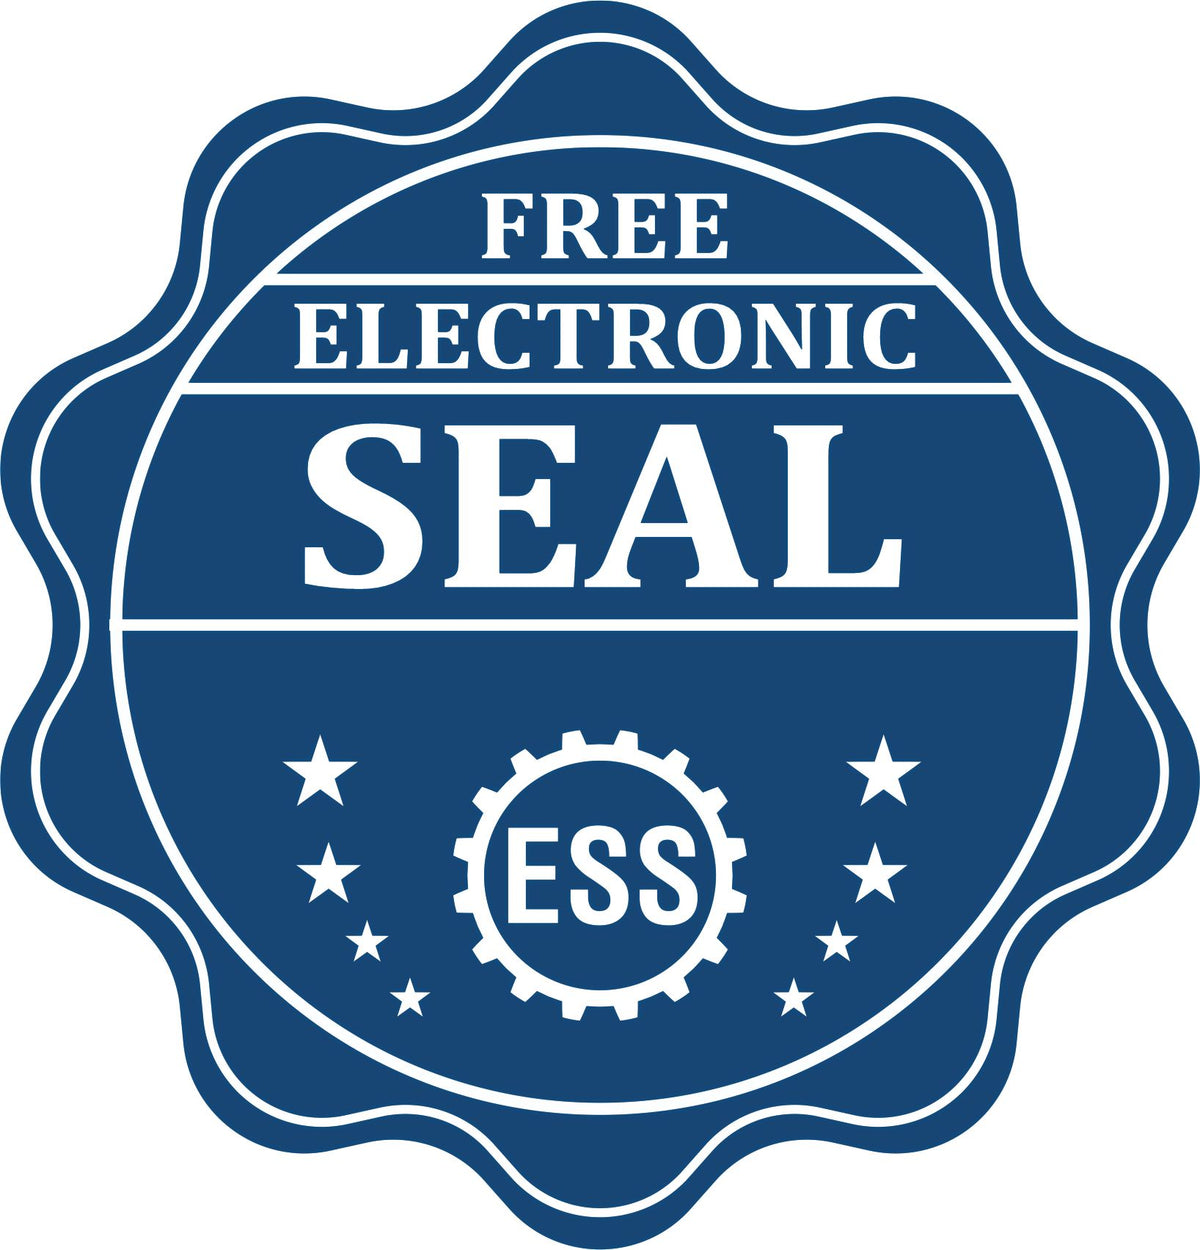 A badge showing a free electronic seal for the New Jersey Desk Architect Embossing Seal with stars and the ESS gear on the emblem.